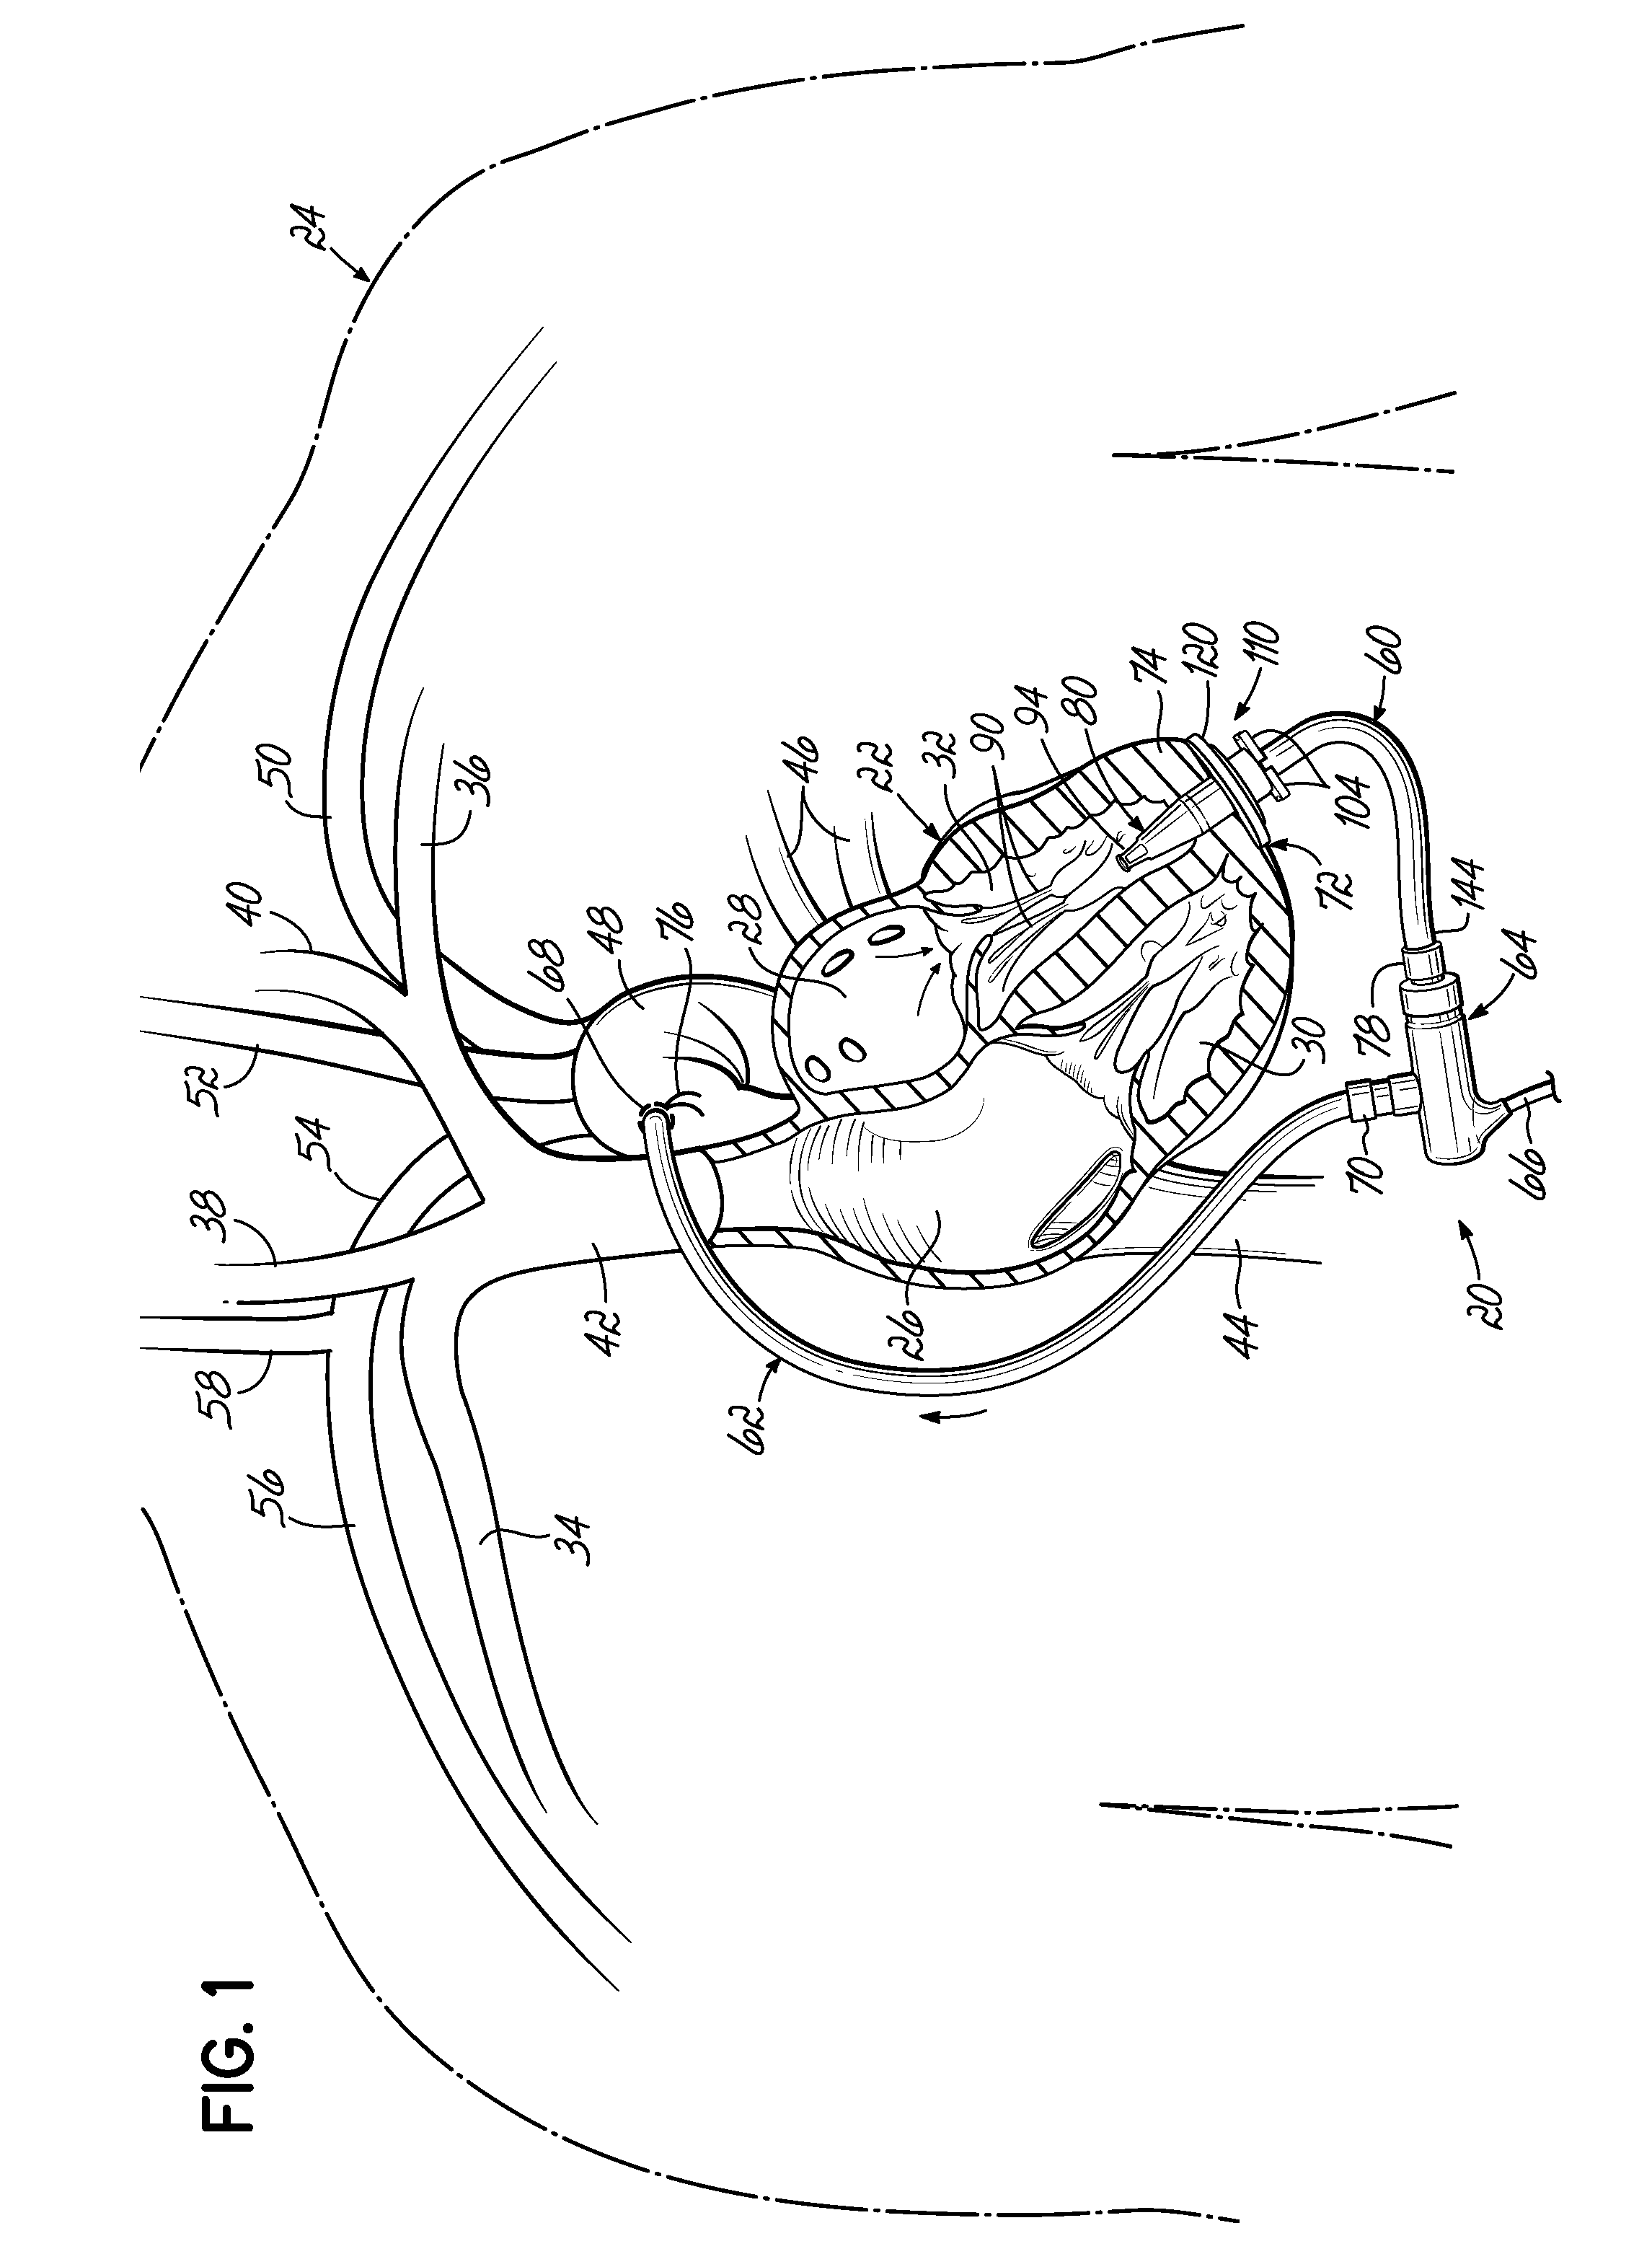 Cannula tips, tissue attachment rings, and methods of delivering and using the same